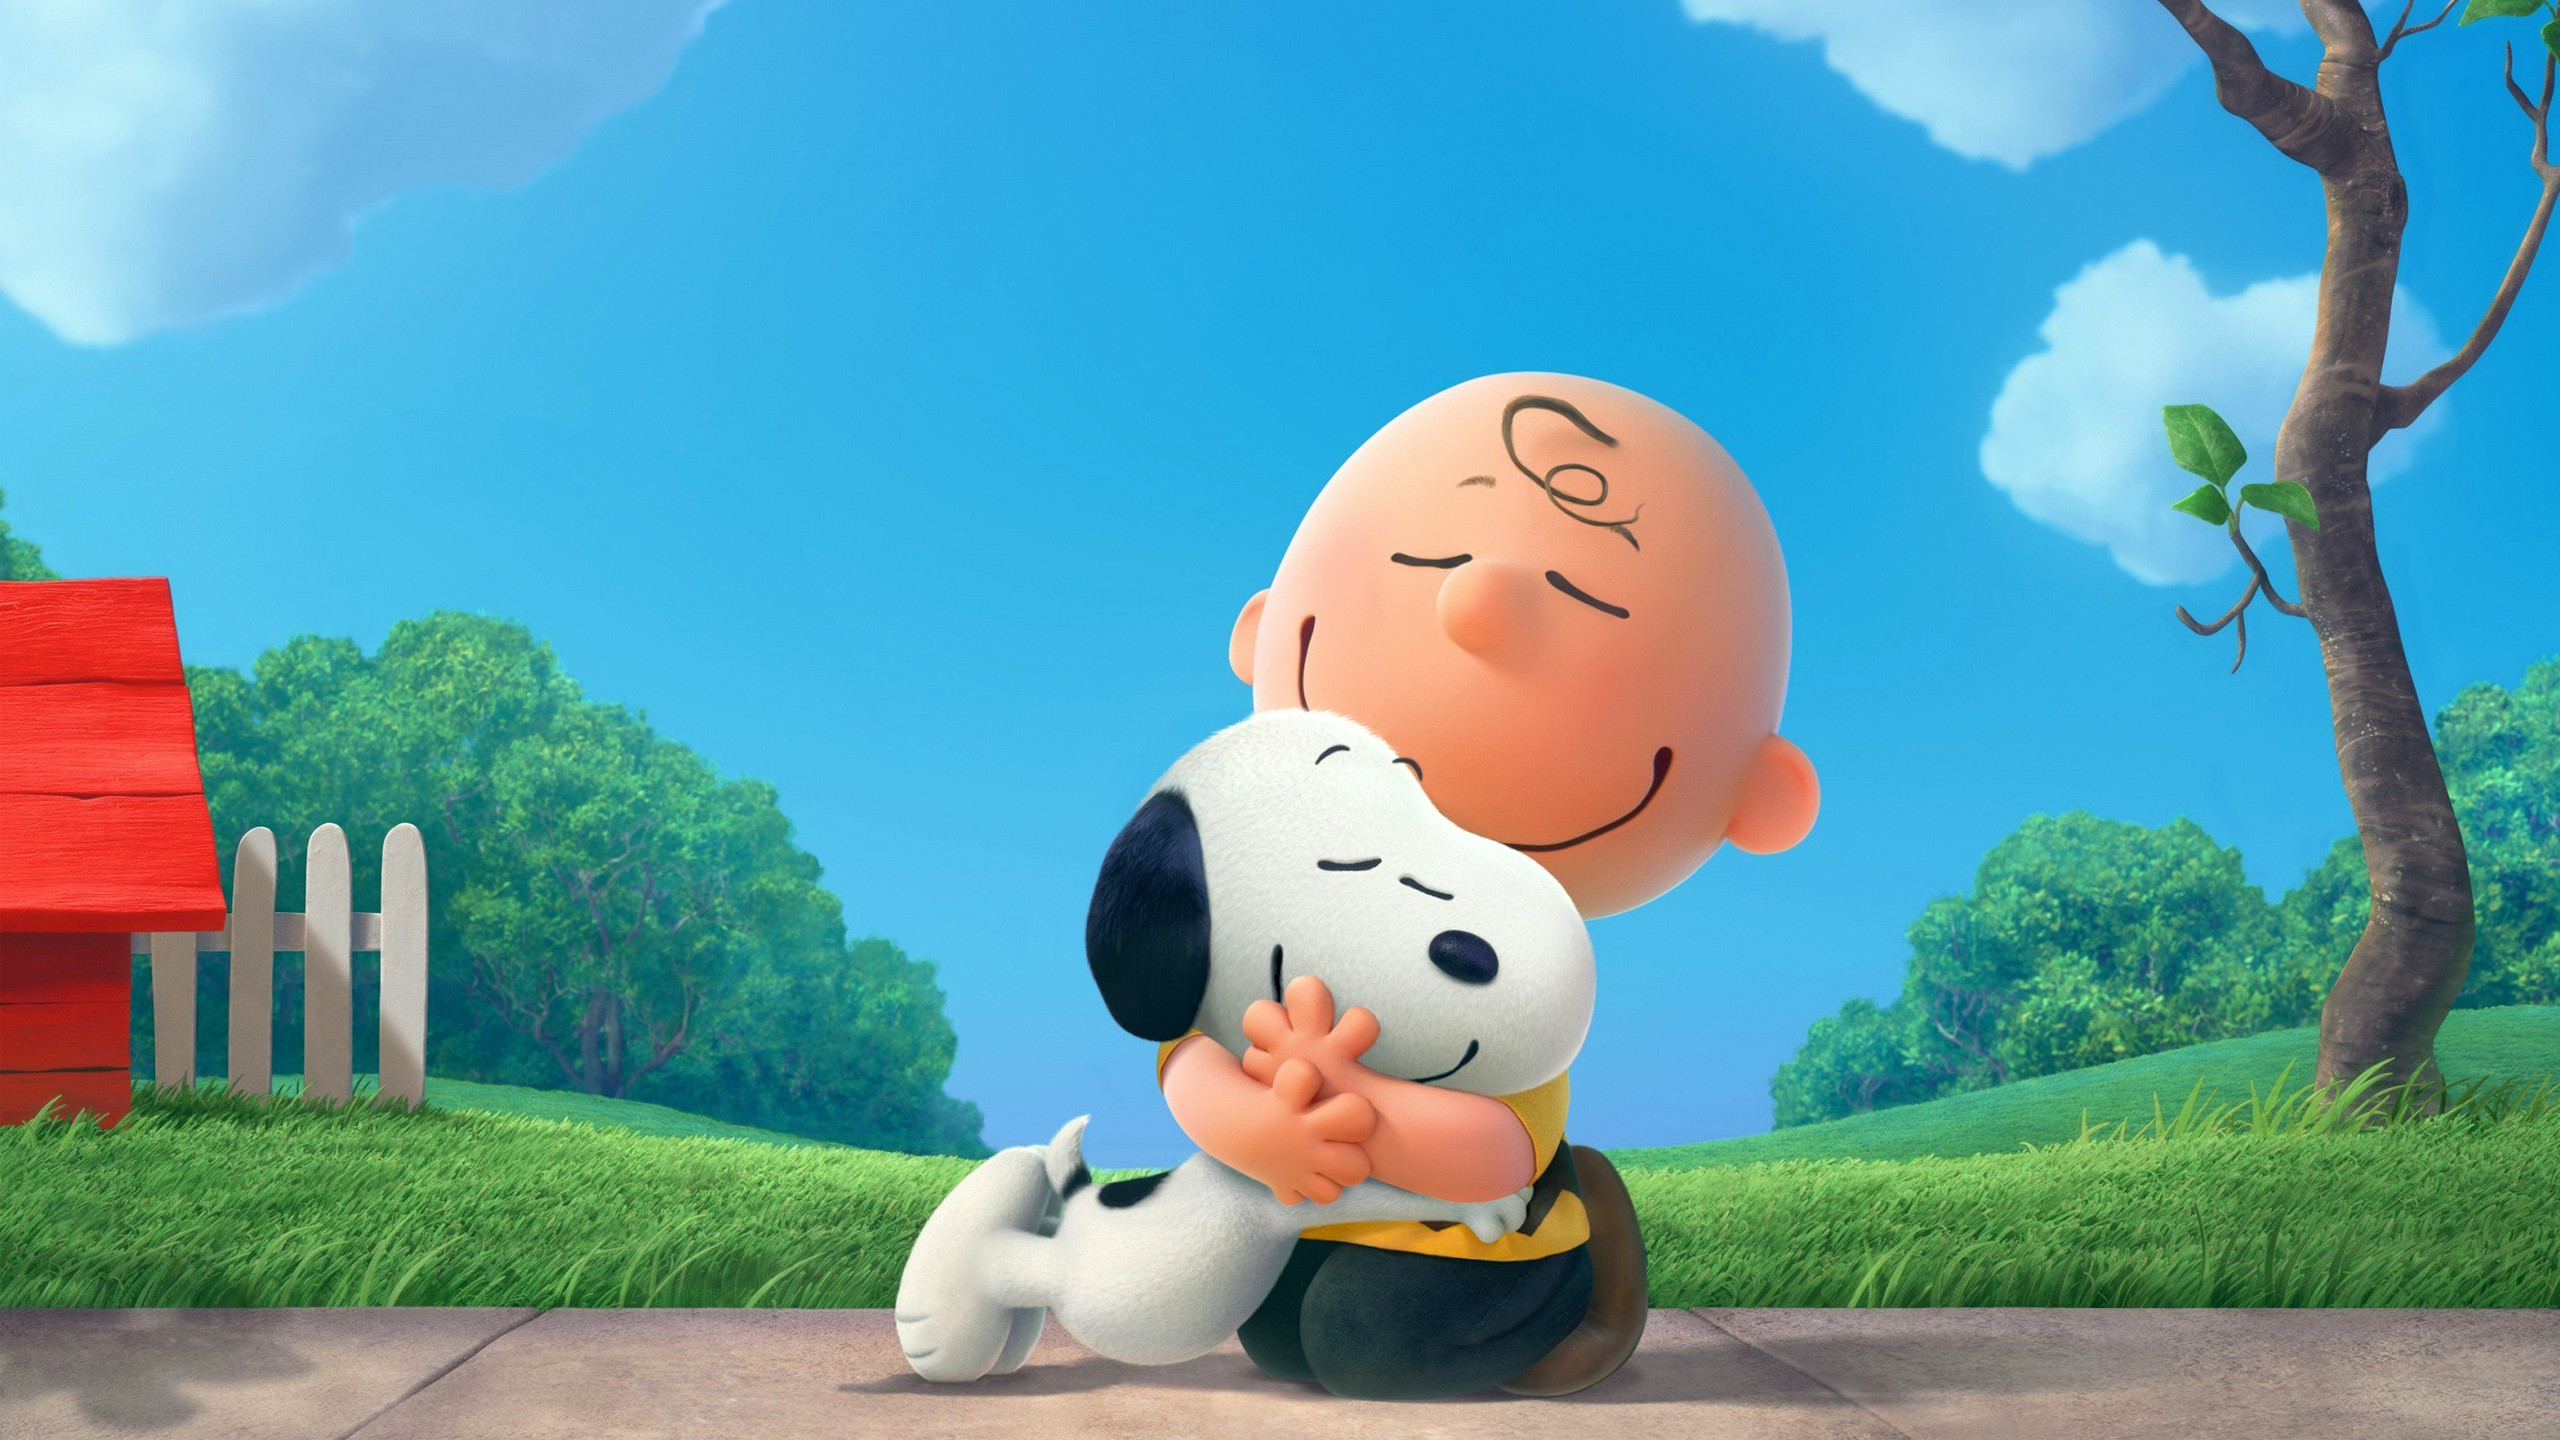 2560x1440 The Peanuts Charlie Brown Snoopy Wallpapers | HD Wallpapers